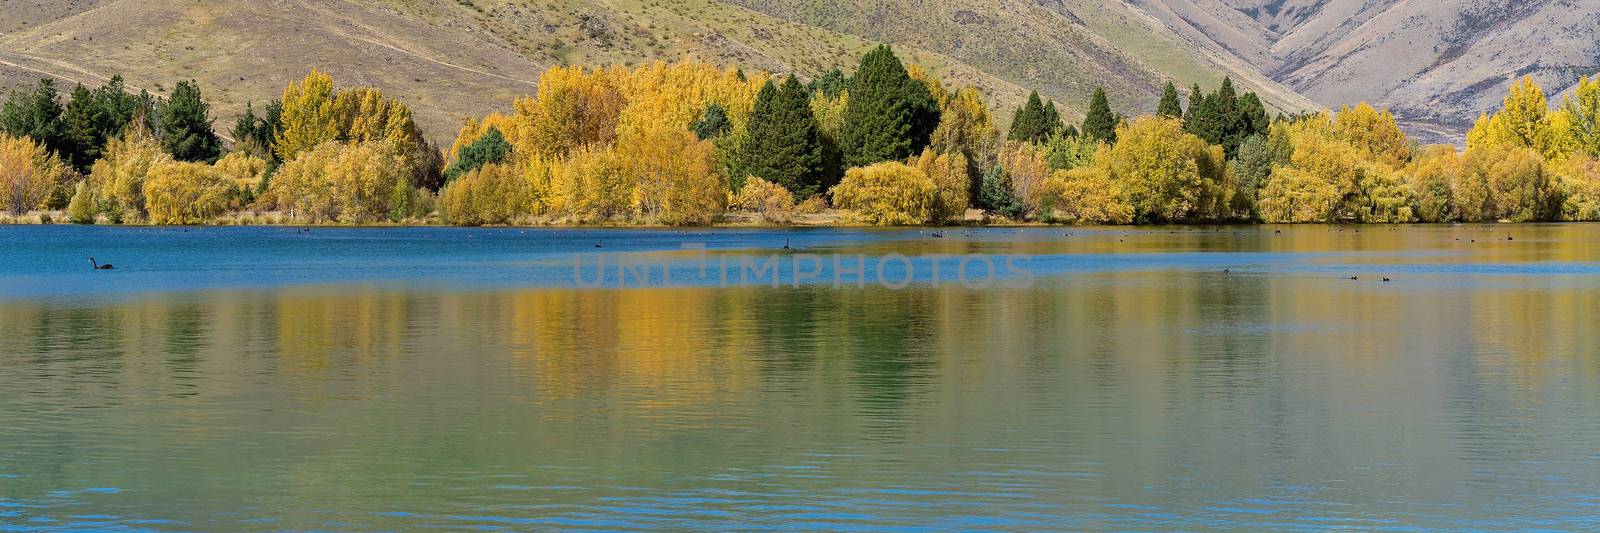 A scenic lake with yellow autumn foliage on the trees on the banks adding beautiful reflections to the calm water